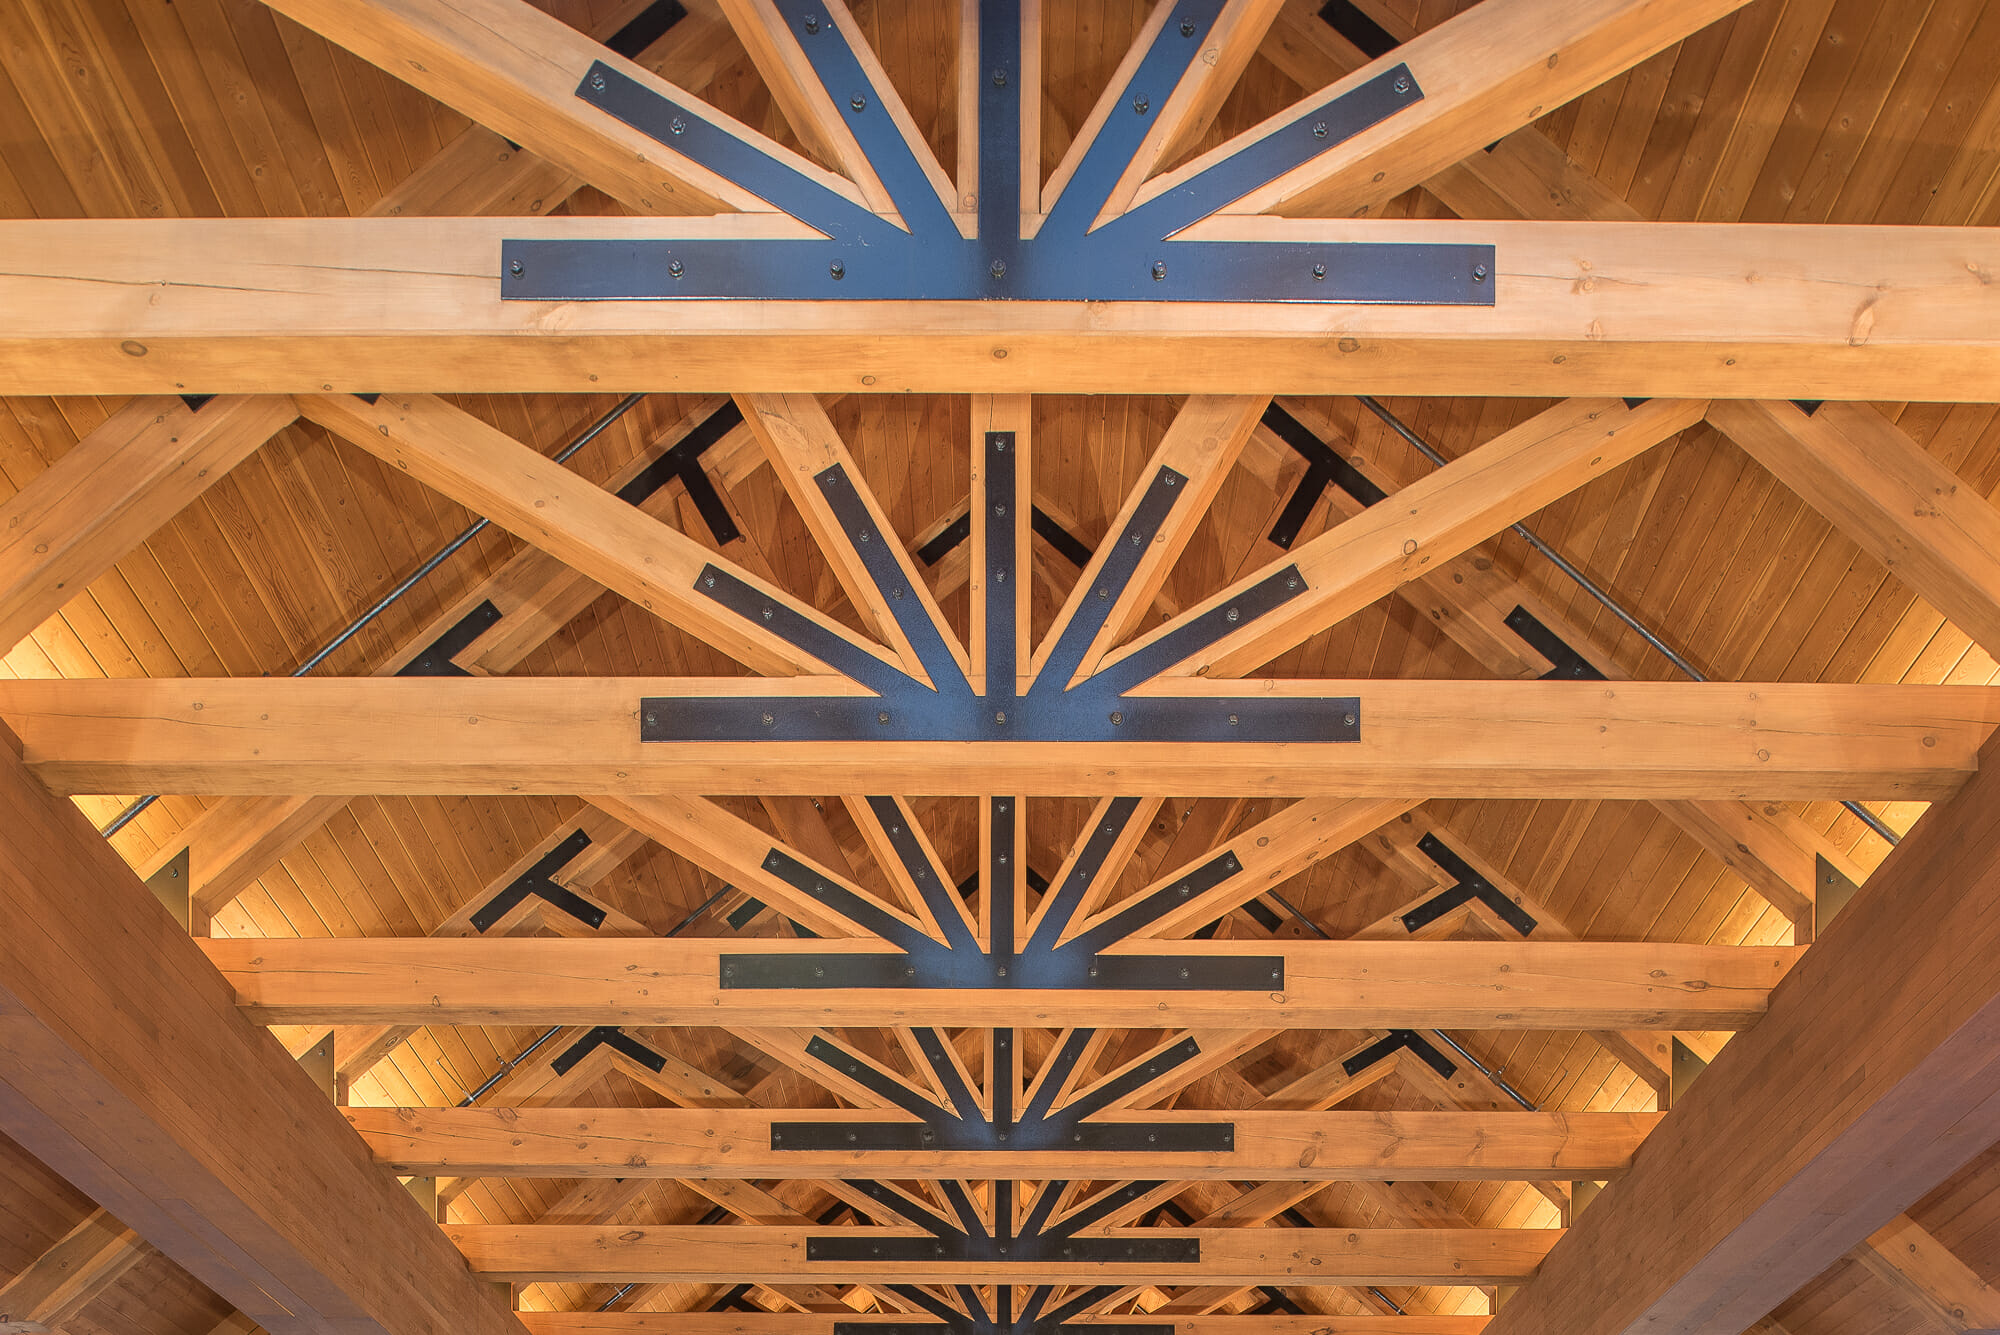 Heavy Timber Porte Cochere Entry Way at the Oxford Casino in Maine with King post trusses in White Pine with steel plates.